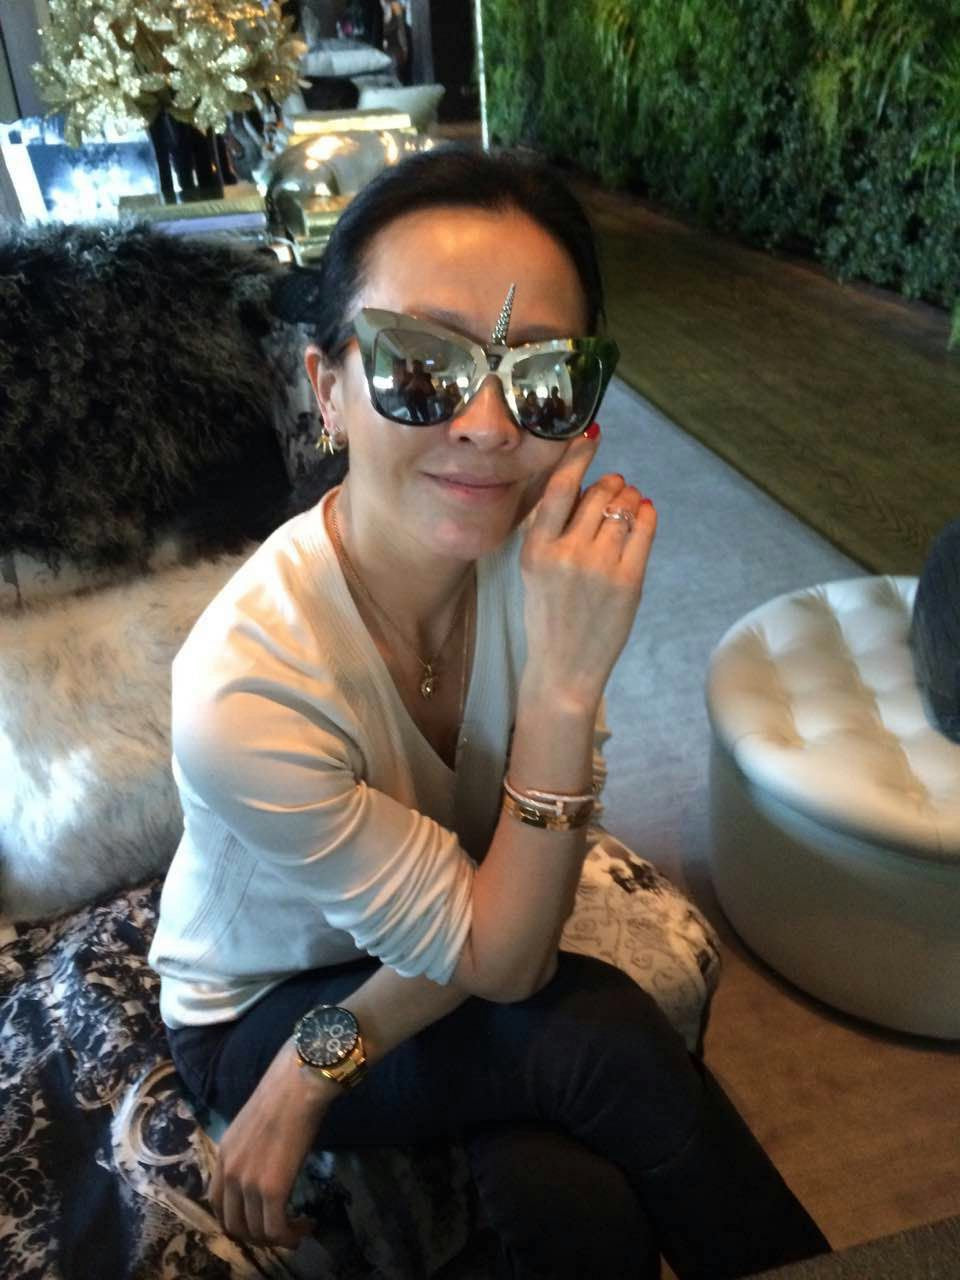 Actress Carina Lau 劉嘉玲 wears REVE by RENE unicorn I am the limited edition sunglasses